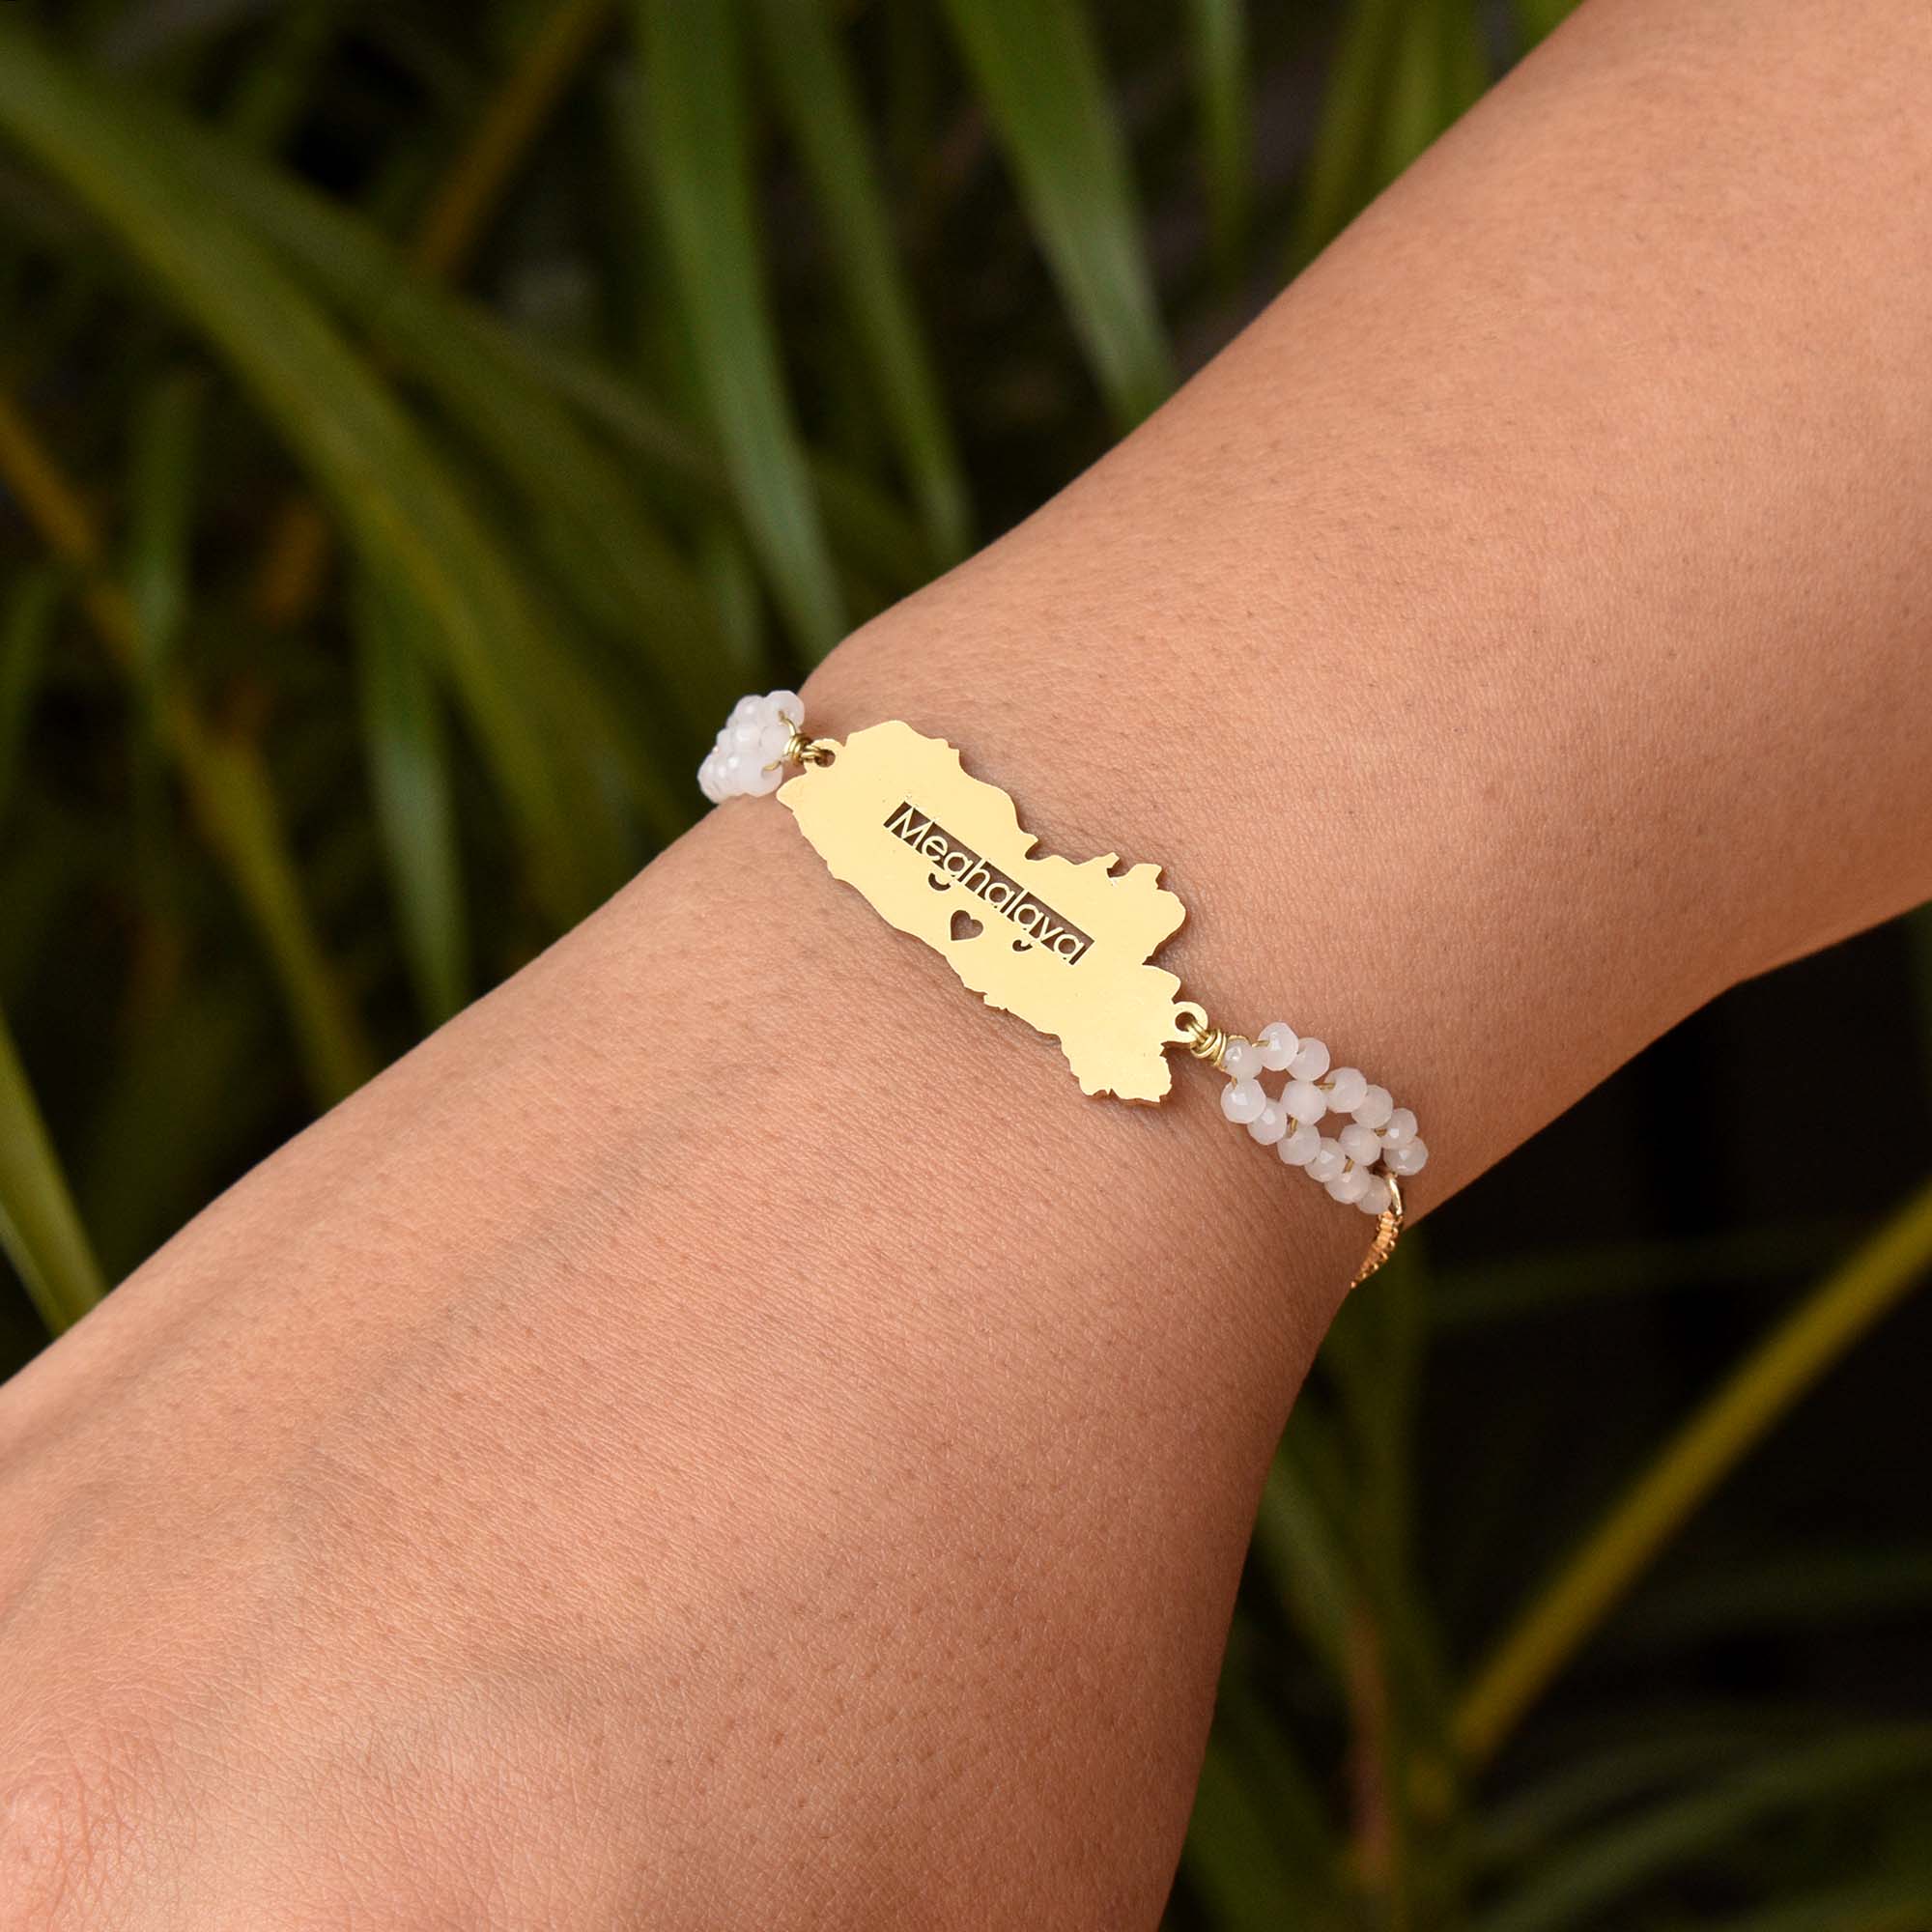 2 Sided Bracelet with State Charm